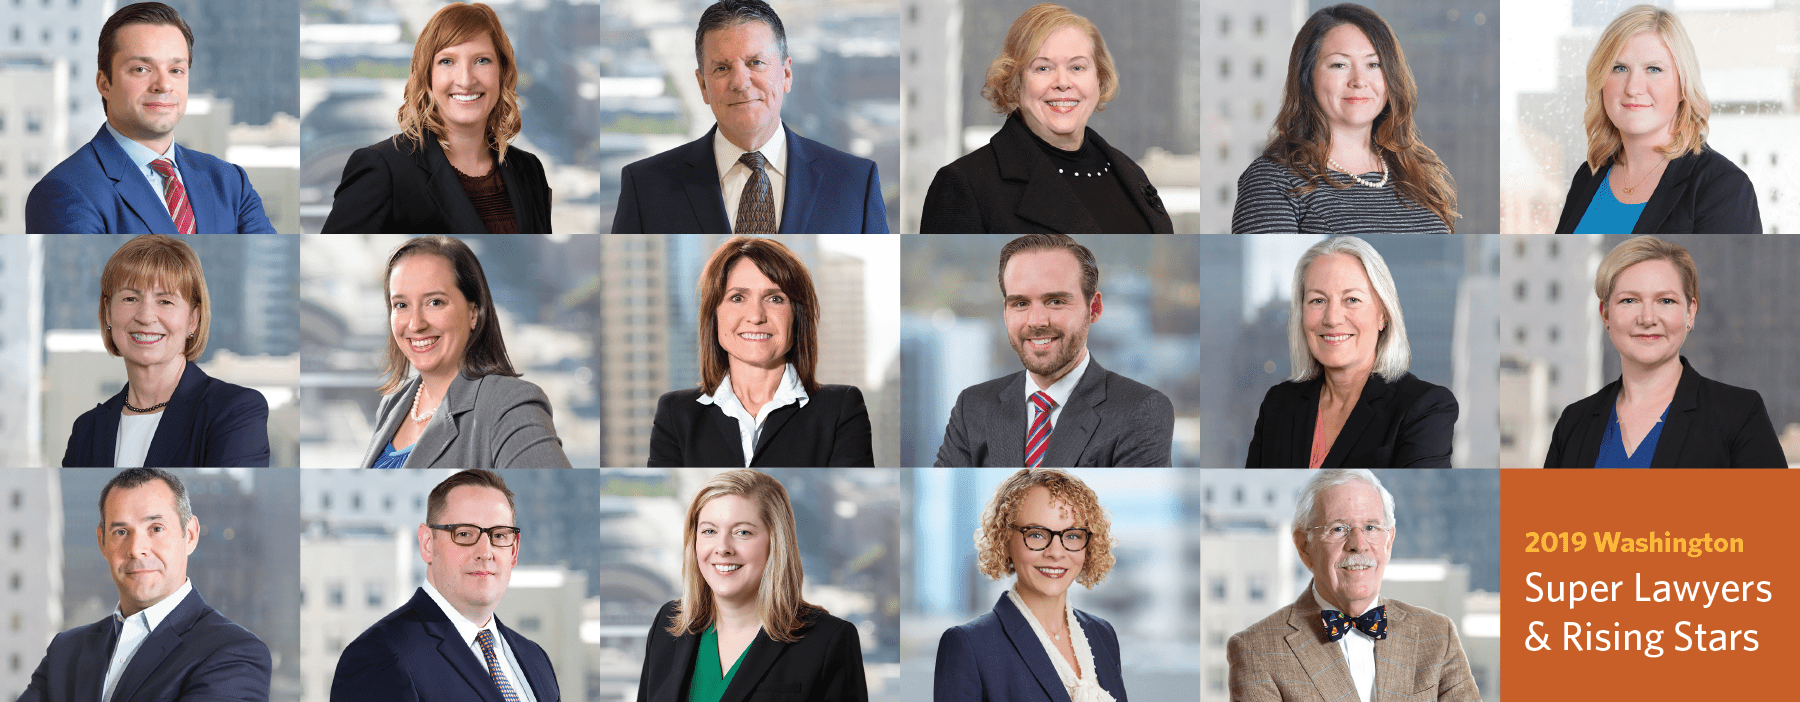 17 McKinley Irvin Attorneys Named 2019 Washington Super Lawyers and Rising Stars